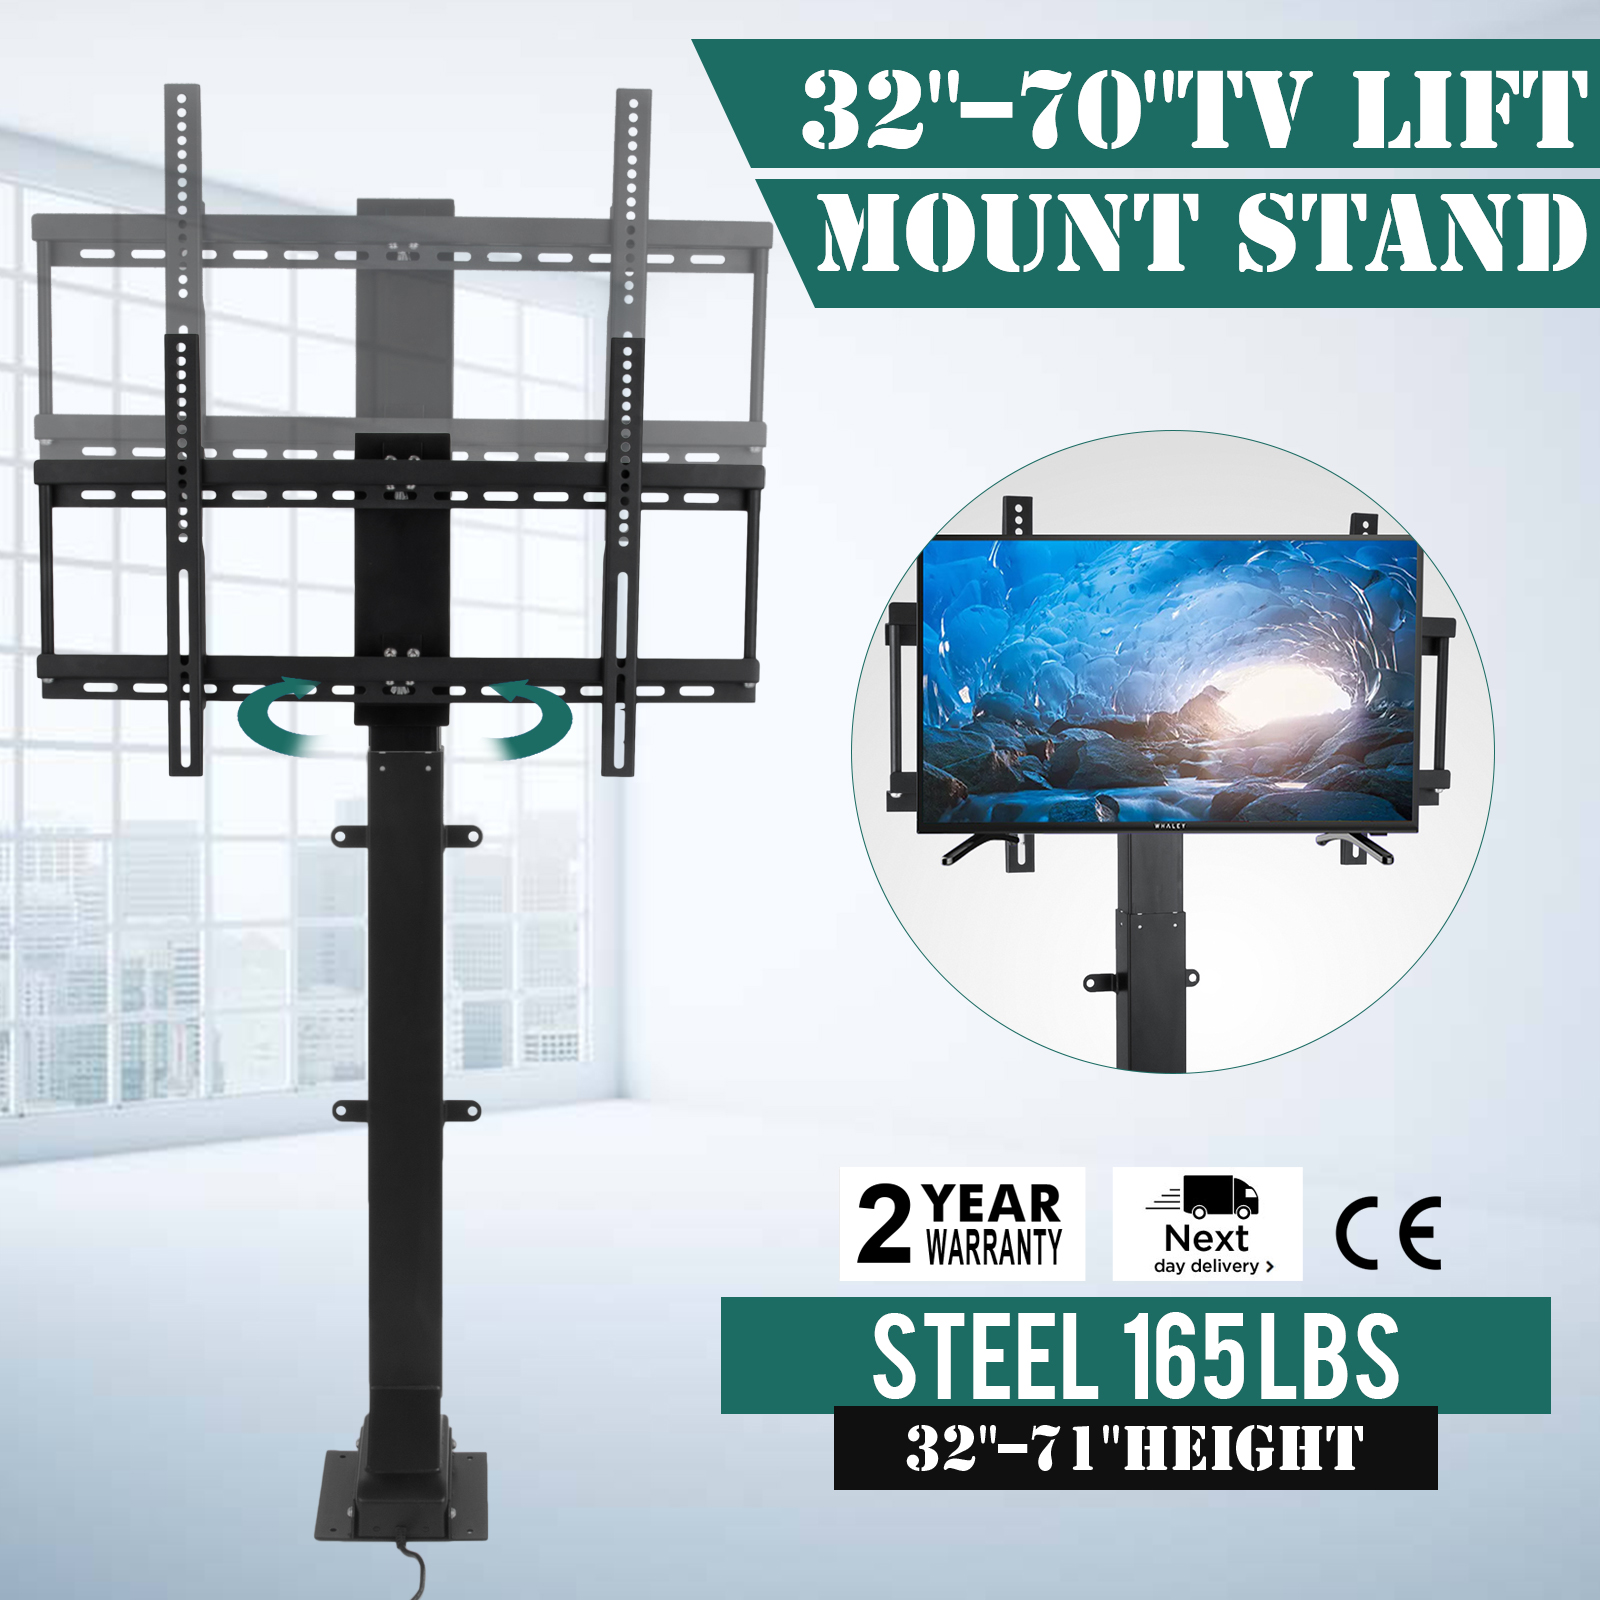 Motorized TV Lift Mount Bracket For 32-70 inch TVs With Remote Controller